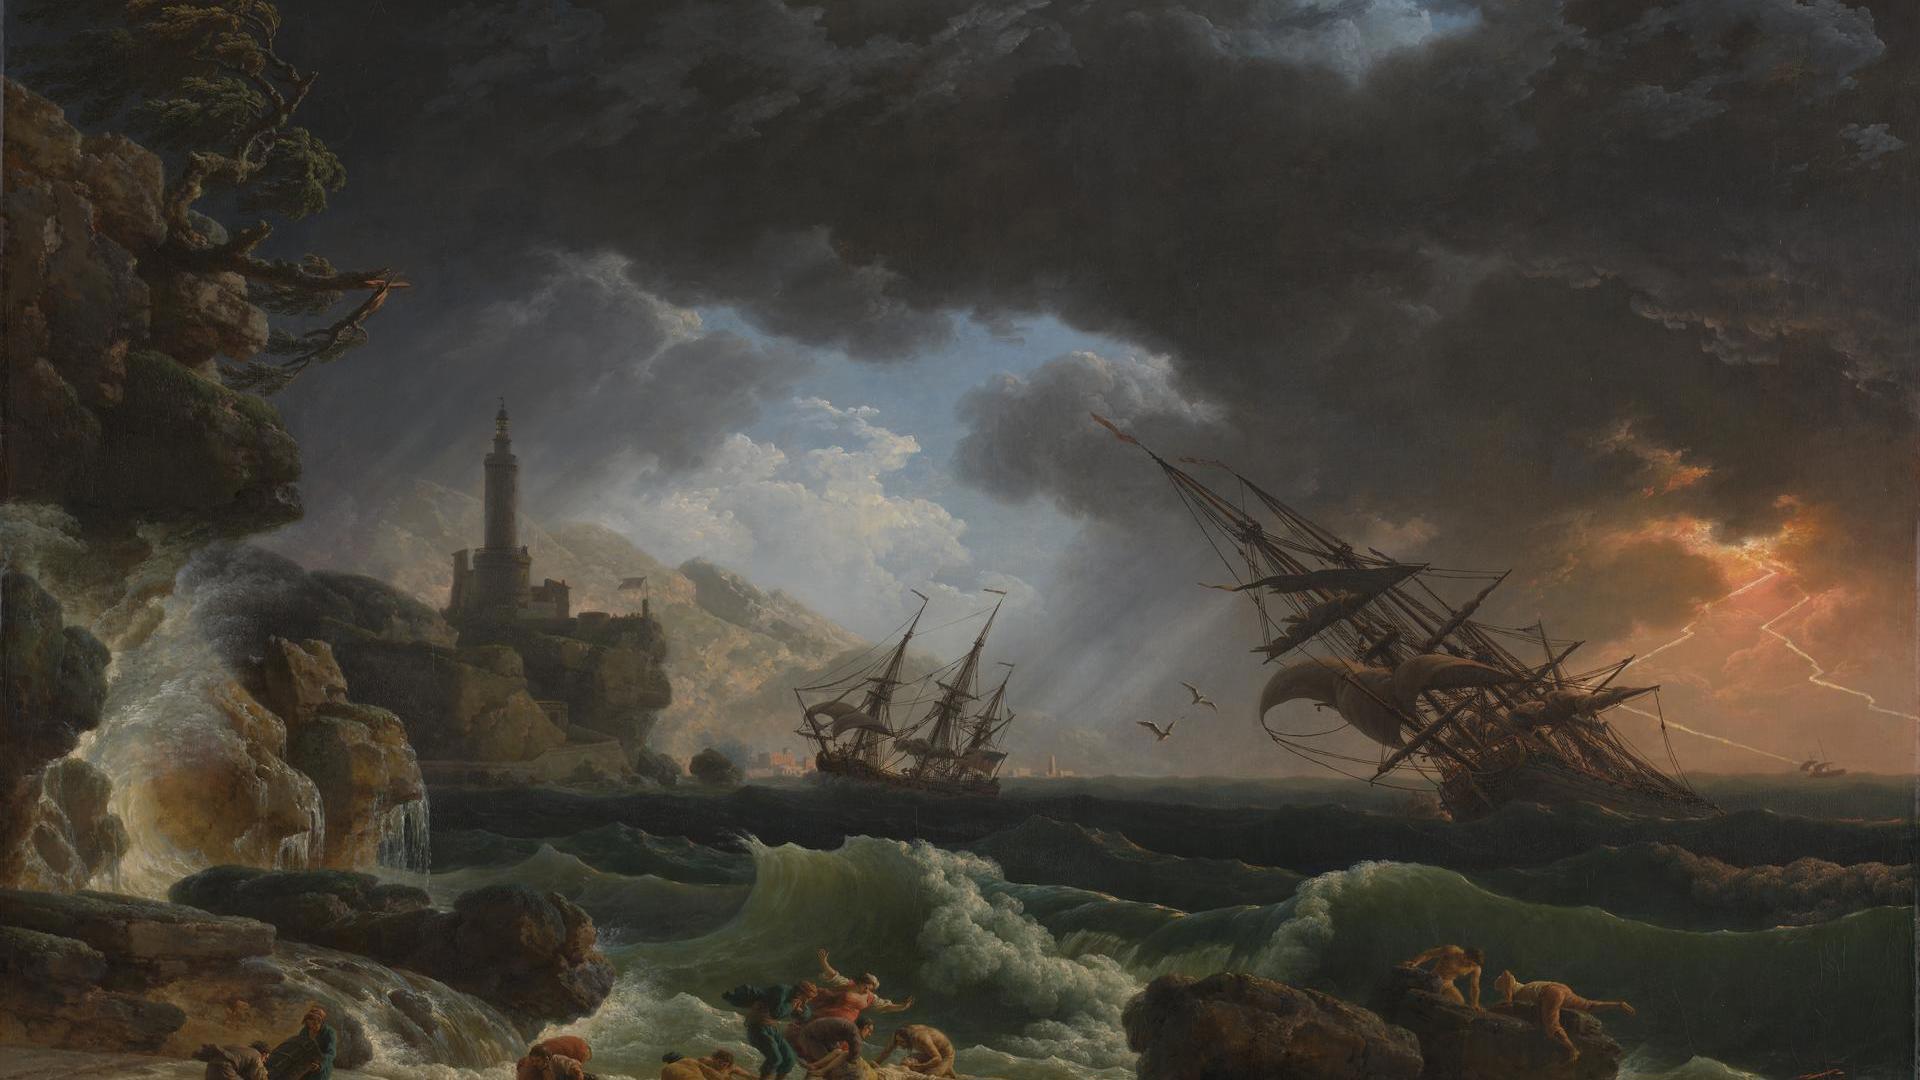 A Shipwreck in Stormy Seas by Claude-Joseph Vernet